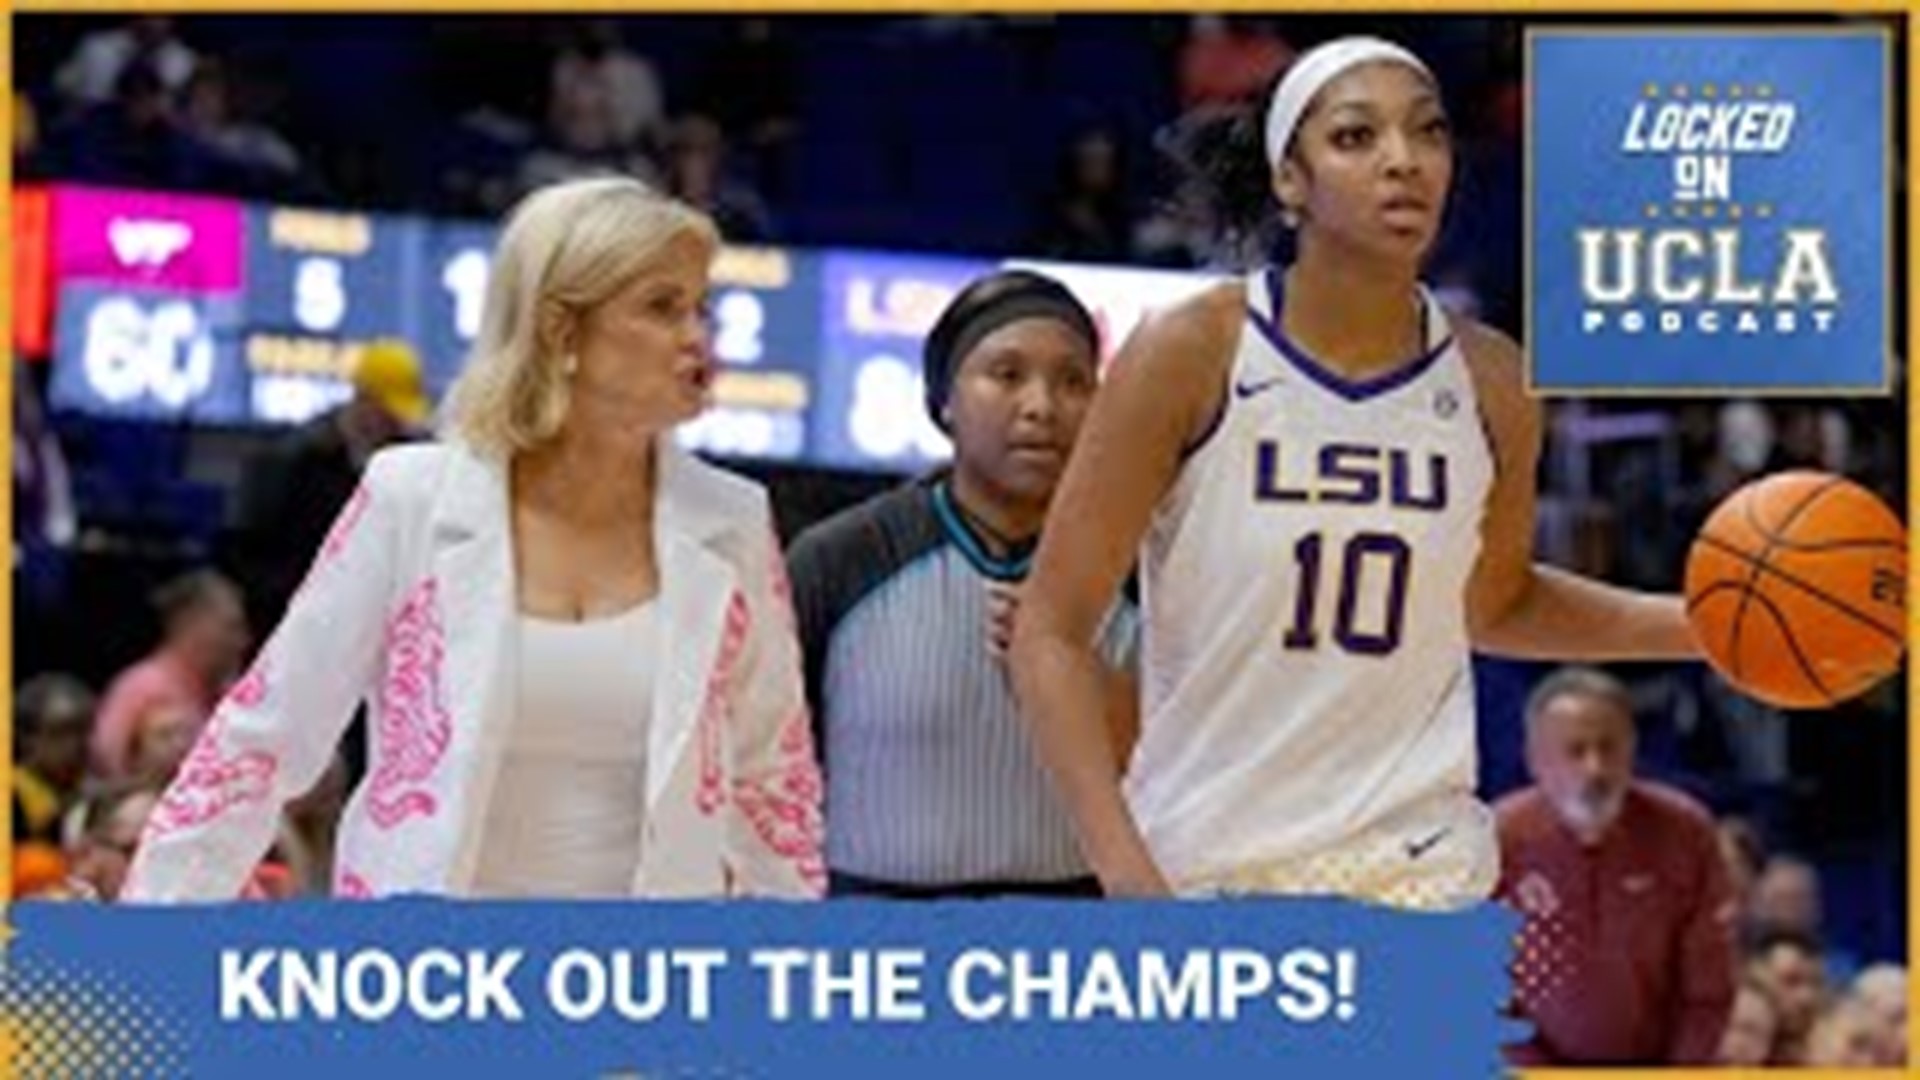 On this episode of Locked On UCLA, Zach Anderson-Yoxsimer discusses the reasons why UCLA Basketball will beat LSU, Kim Mulkey, & Angel Reese in the Sweet 16.